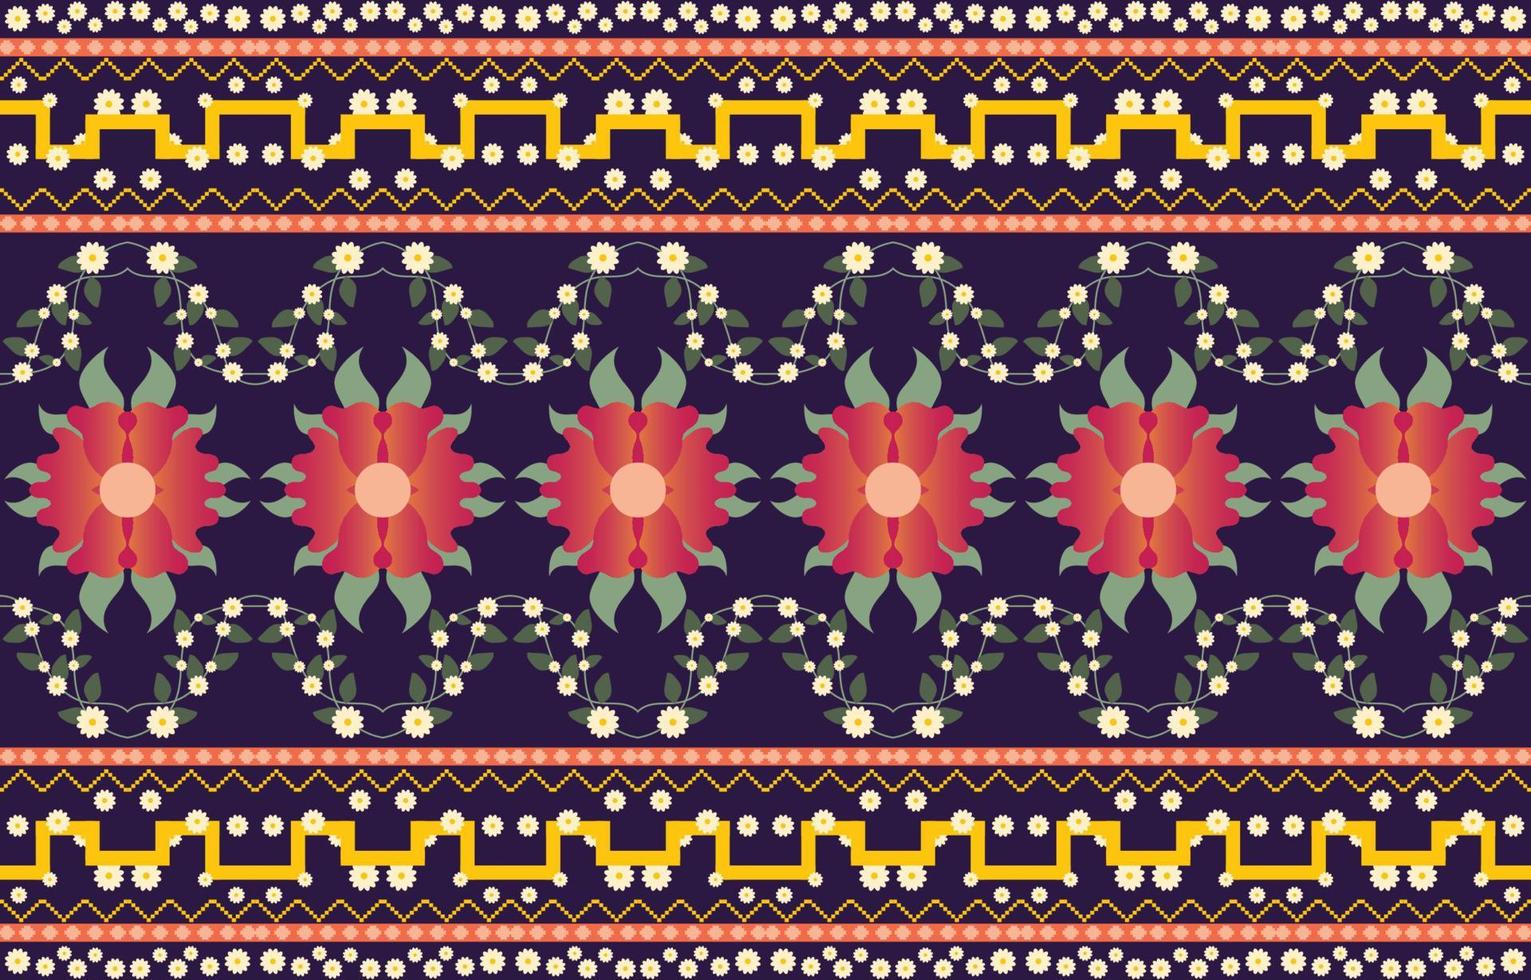 flower colorful fabric ,Geometric ethnic pattern in traditional oriental background Design for carpet,wallpaper,clothing,wrapping,batik,Vector illustration embroidery style. vector